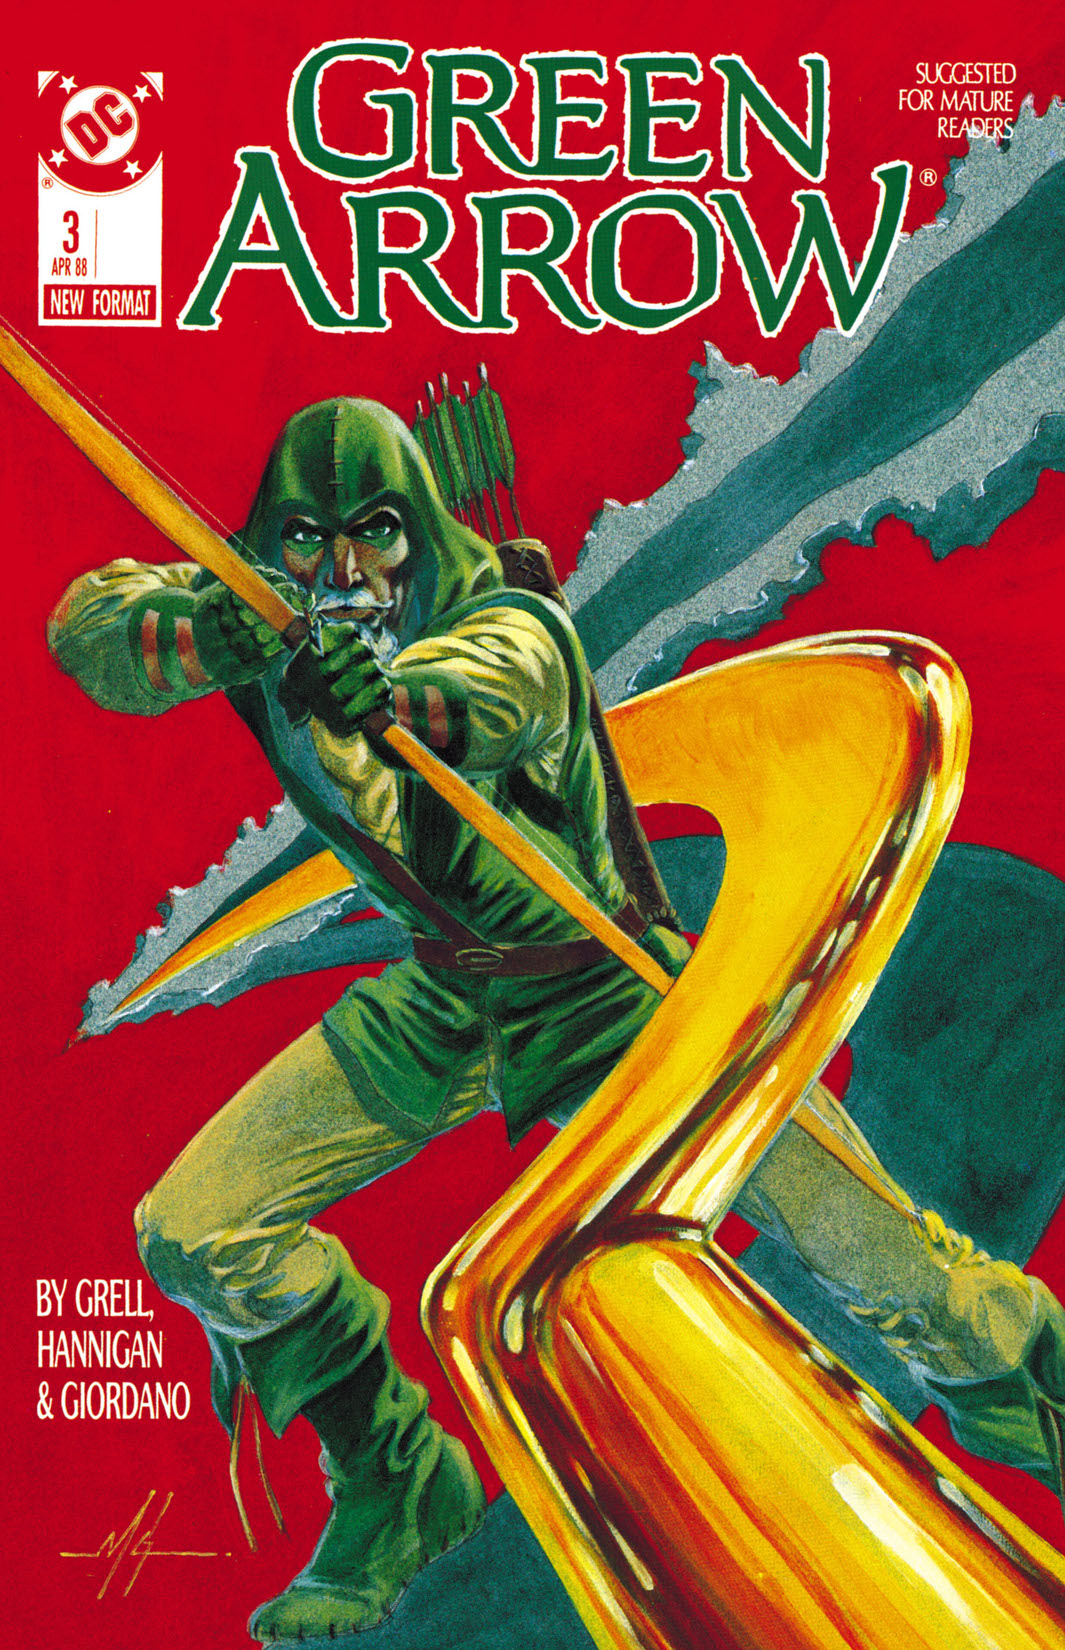 Green Arrow (1987-) #3 preview images